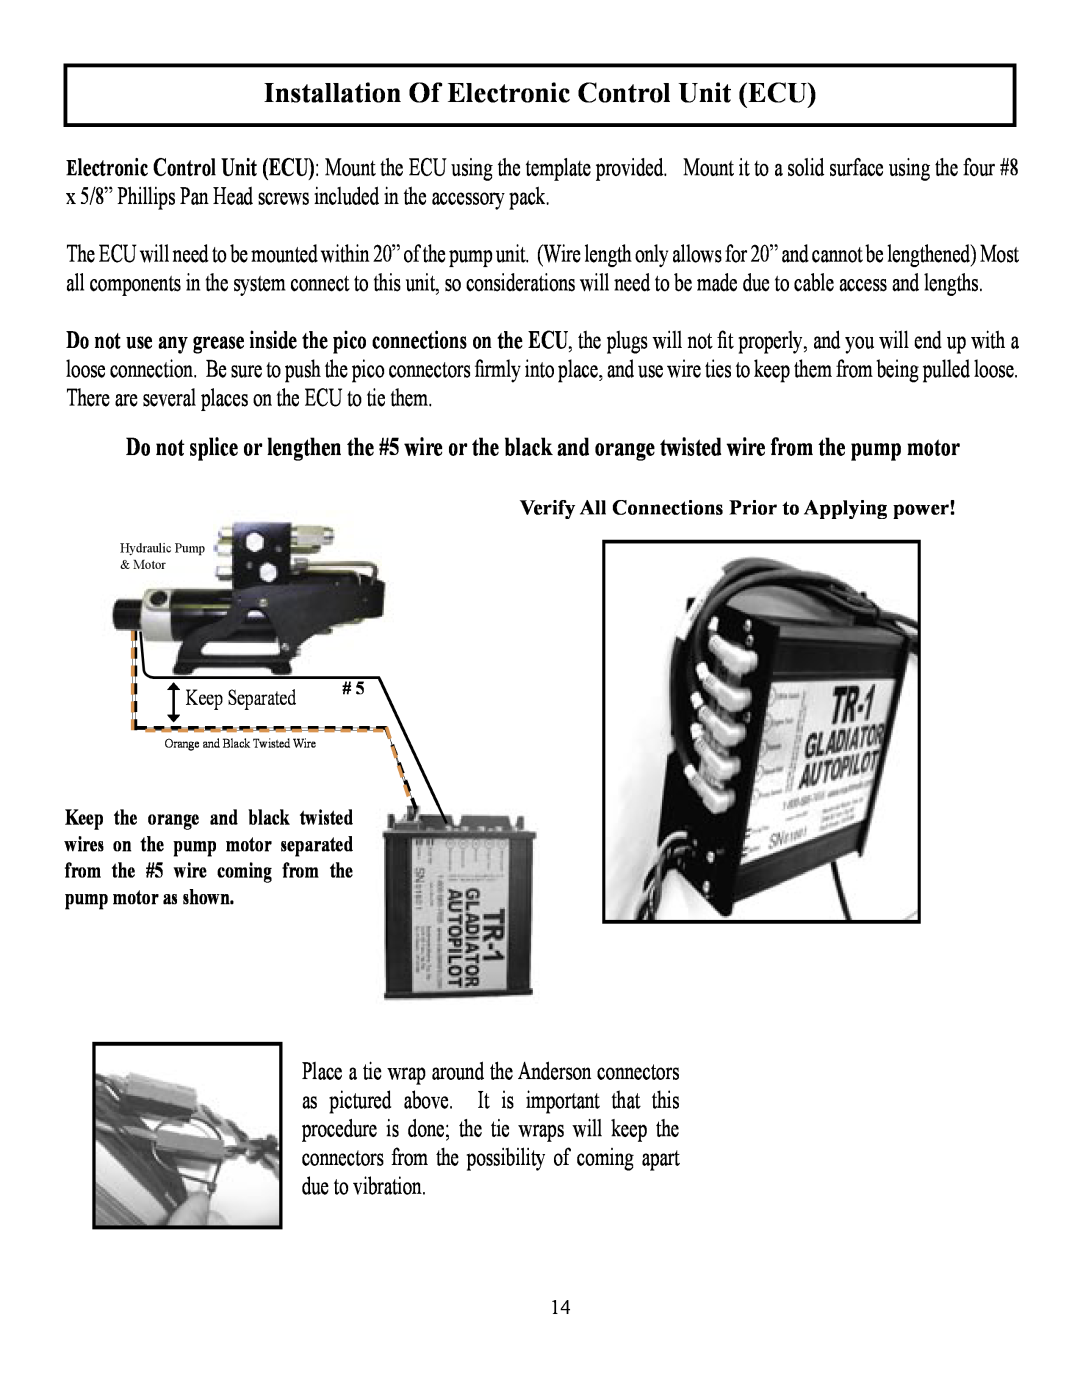 Garmin TR-1 Installation Of Electronic Control Unit ECU, Verify All Connections Prior to Applying power, Keep Separated 